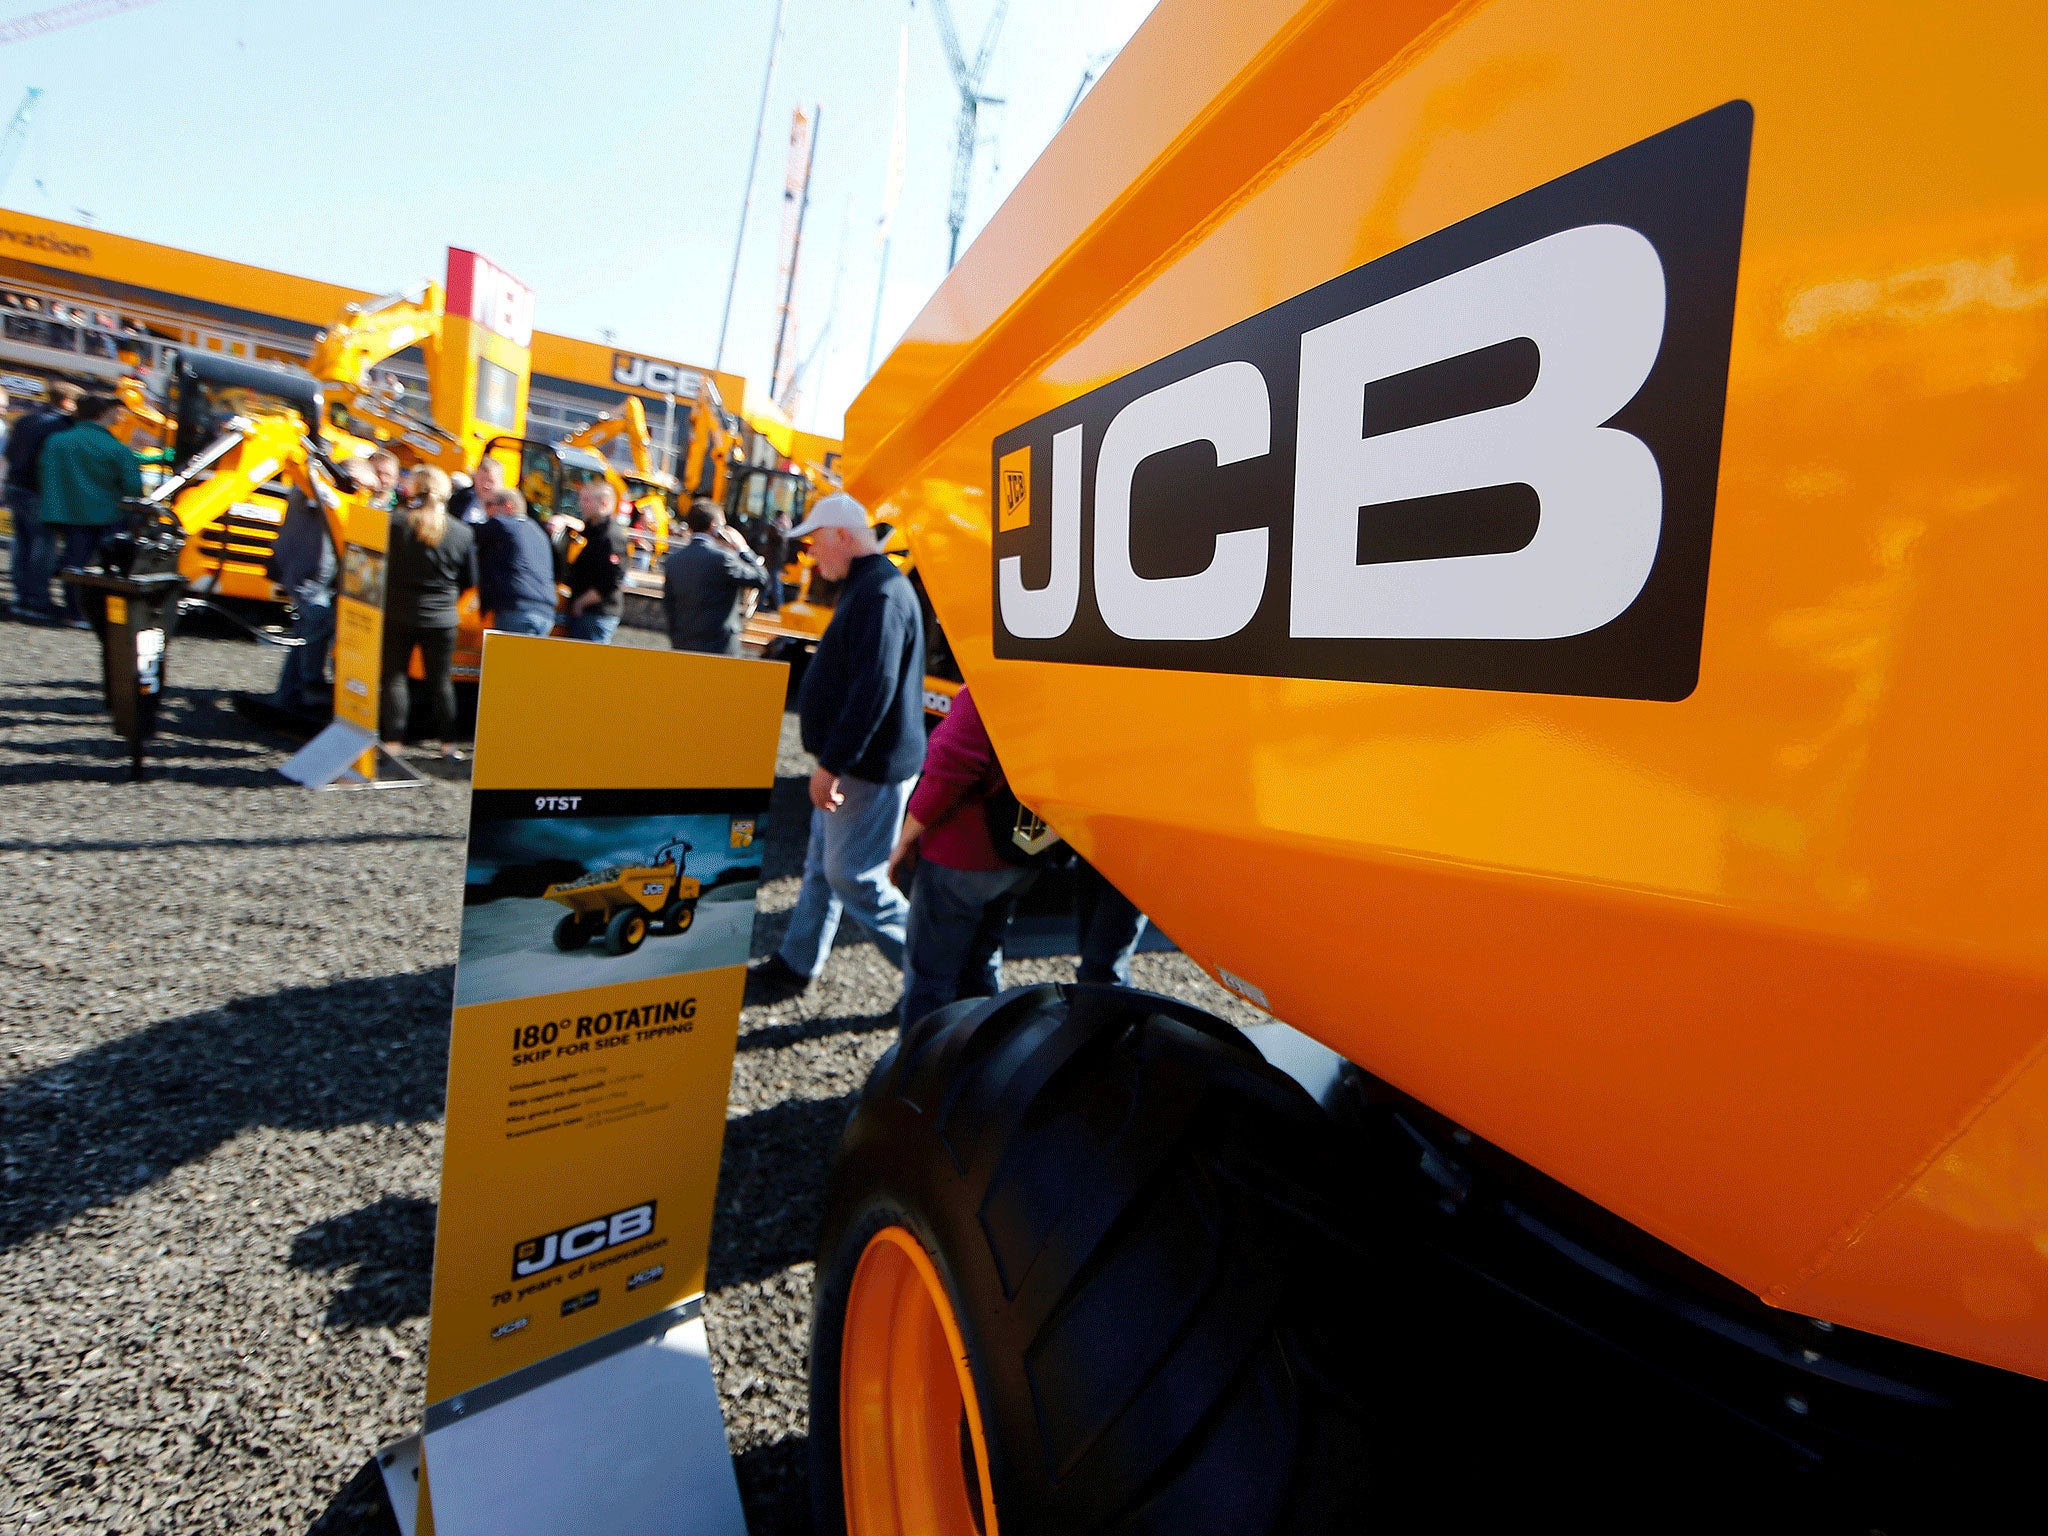 JCB says it has now ‘completely withdrawn’ from Russia